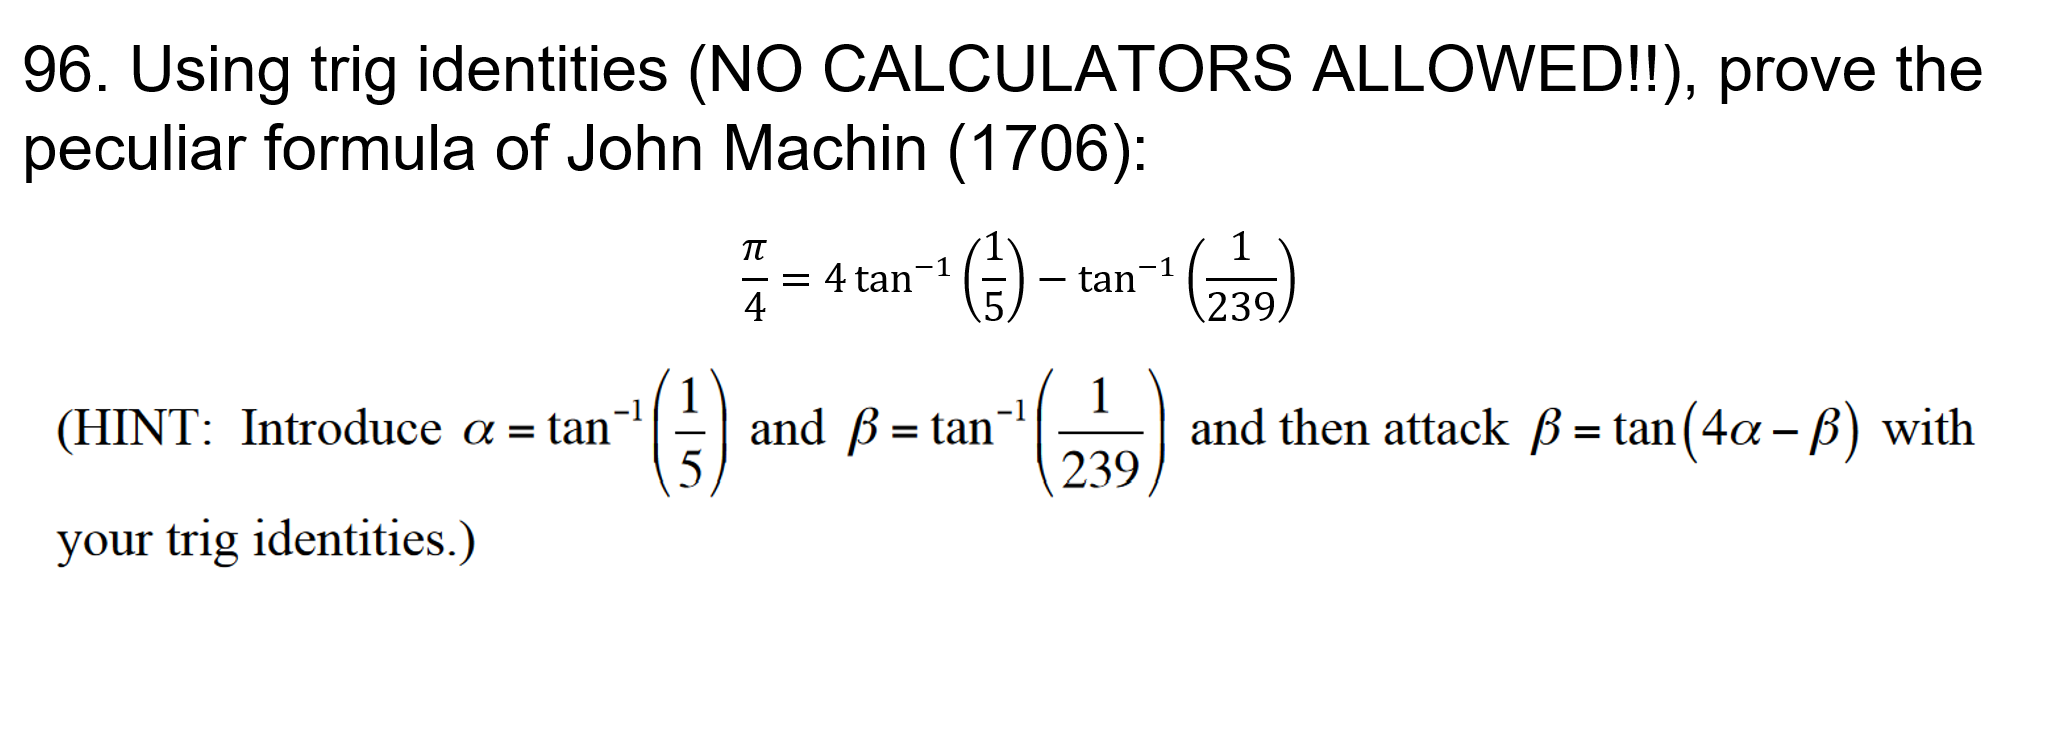 96. Using trig identities (NO CALCULATORS ALLOWED!!), prove the
peculiar formula of John Machin (1706):
TT
-1
= 4 tan-1
4
tan
239
1
and then attack B= tan(4a - B) with
239
-1
and B tan
(HINT: Introduce a = tan'
=
your trig identities.)
